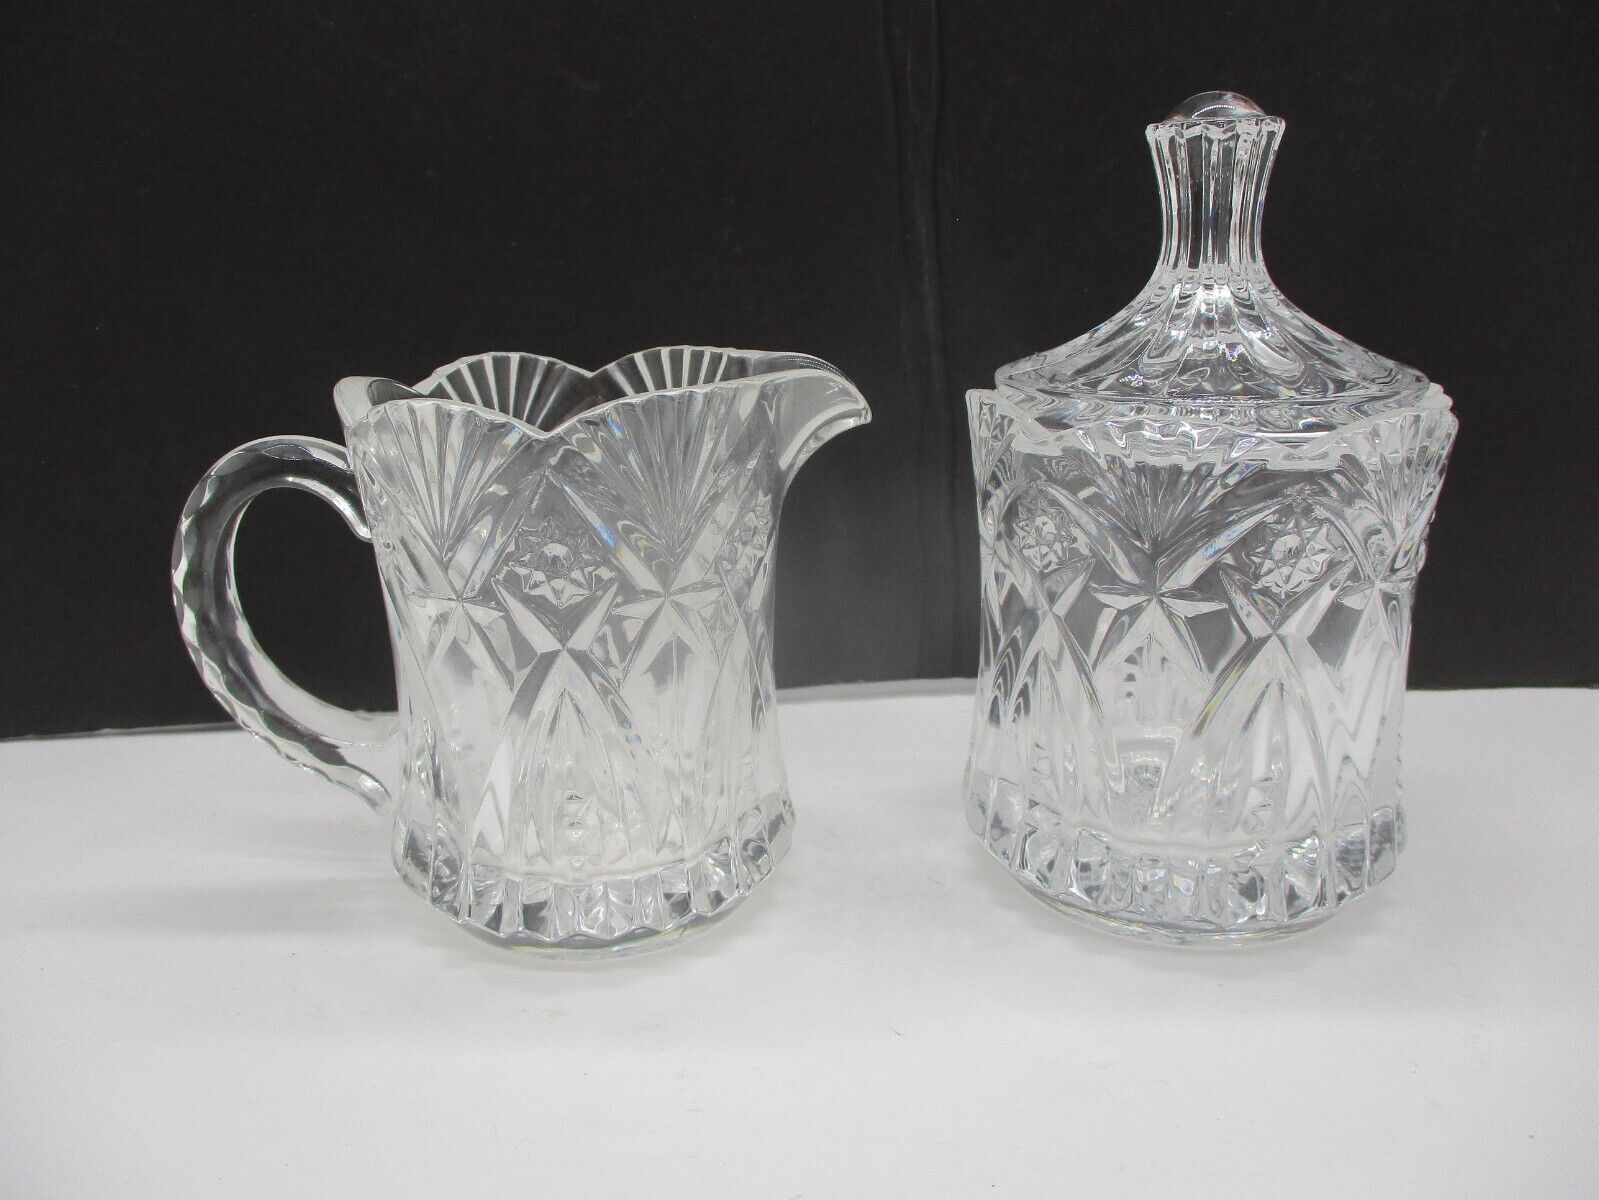 Vintage Cut Etched Glass Creamer and Sugar